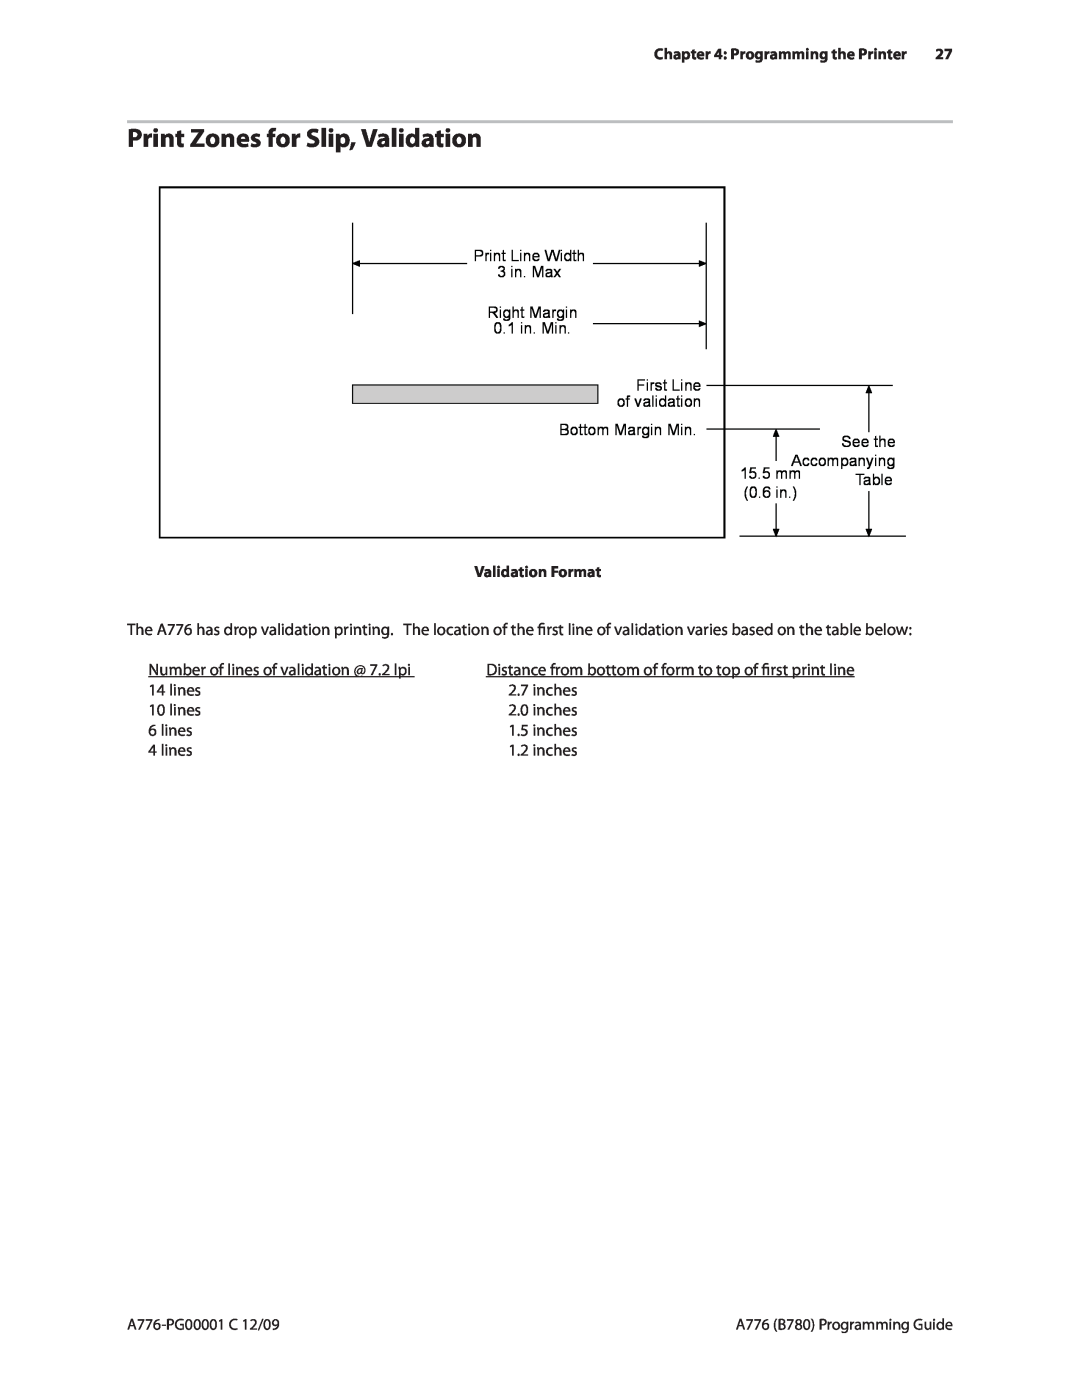 Cognitive Solutions A776, B780 manual Print Zones for Slip, Validation 